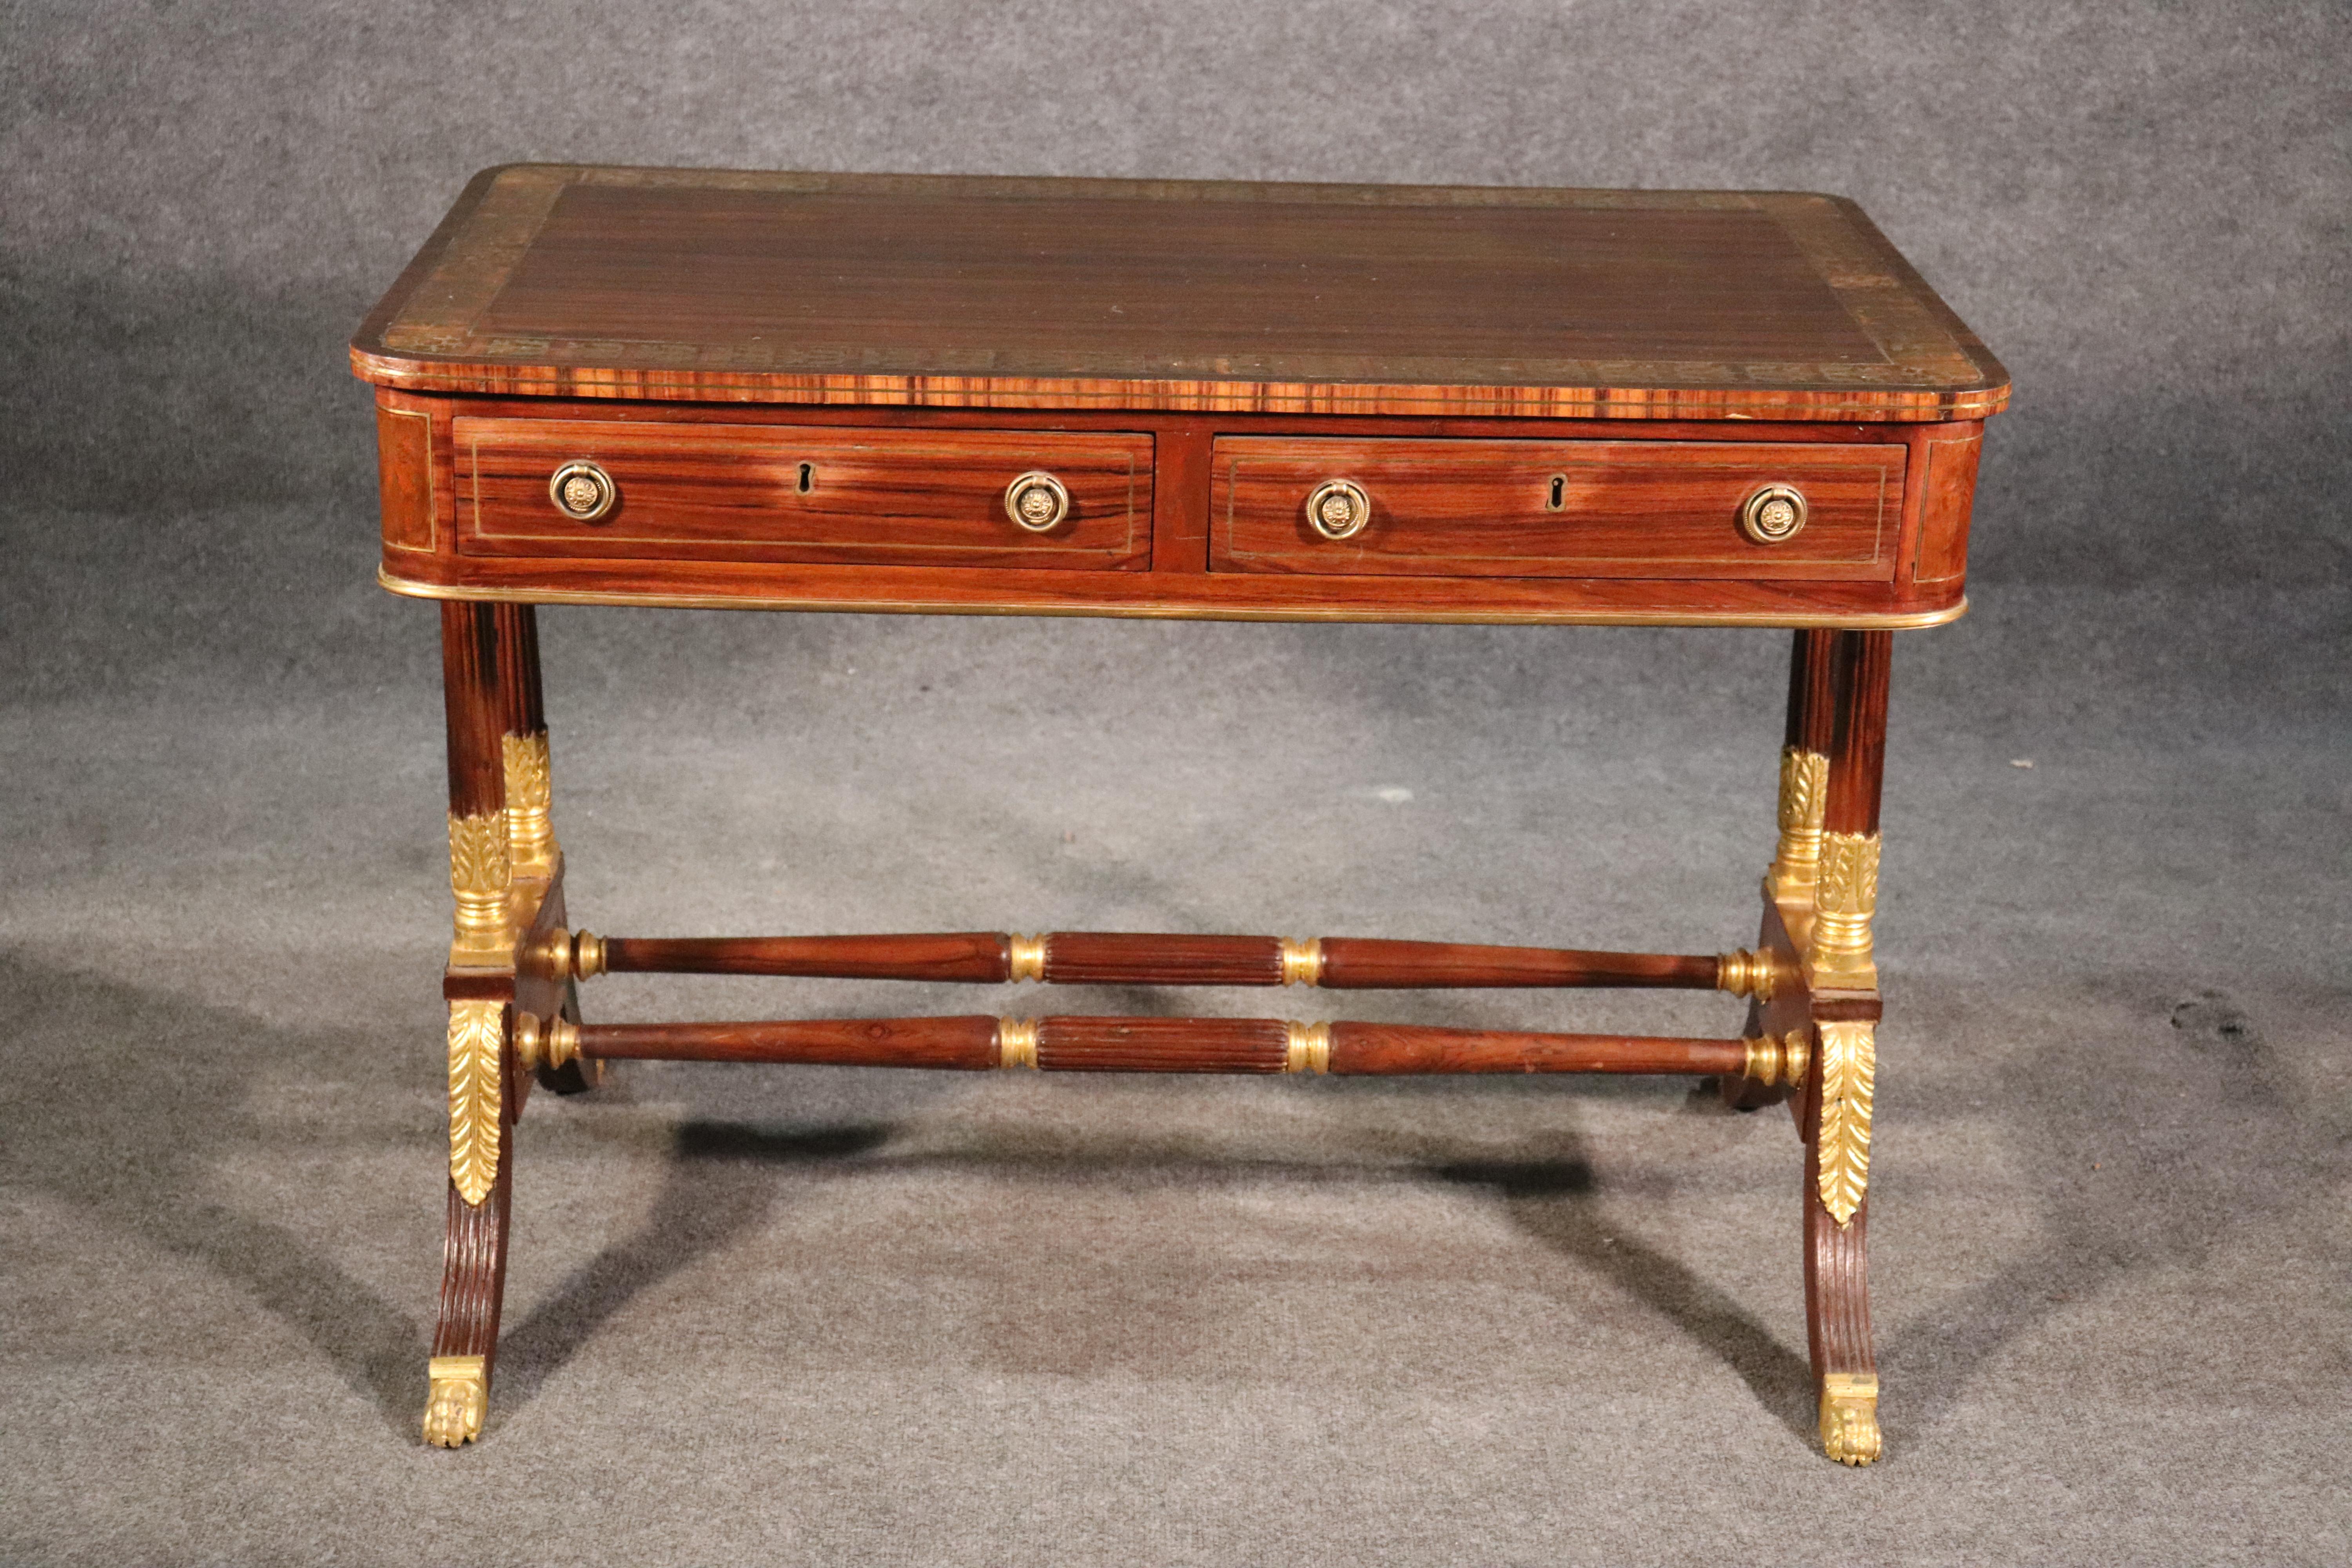 This is a superb Boulle brass inlaid rosewood Russian writing desk. The desk is made of solid rosewood and features faux rosewood paint decorating. The desk is Russian and dates to the late 1800s era and is in the Empire taste. The gold leaf is done